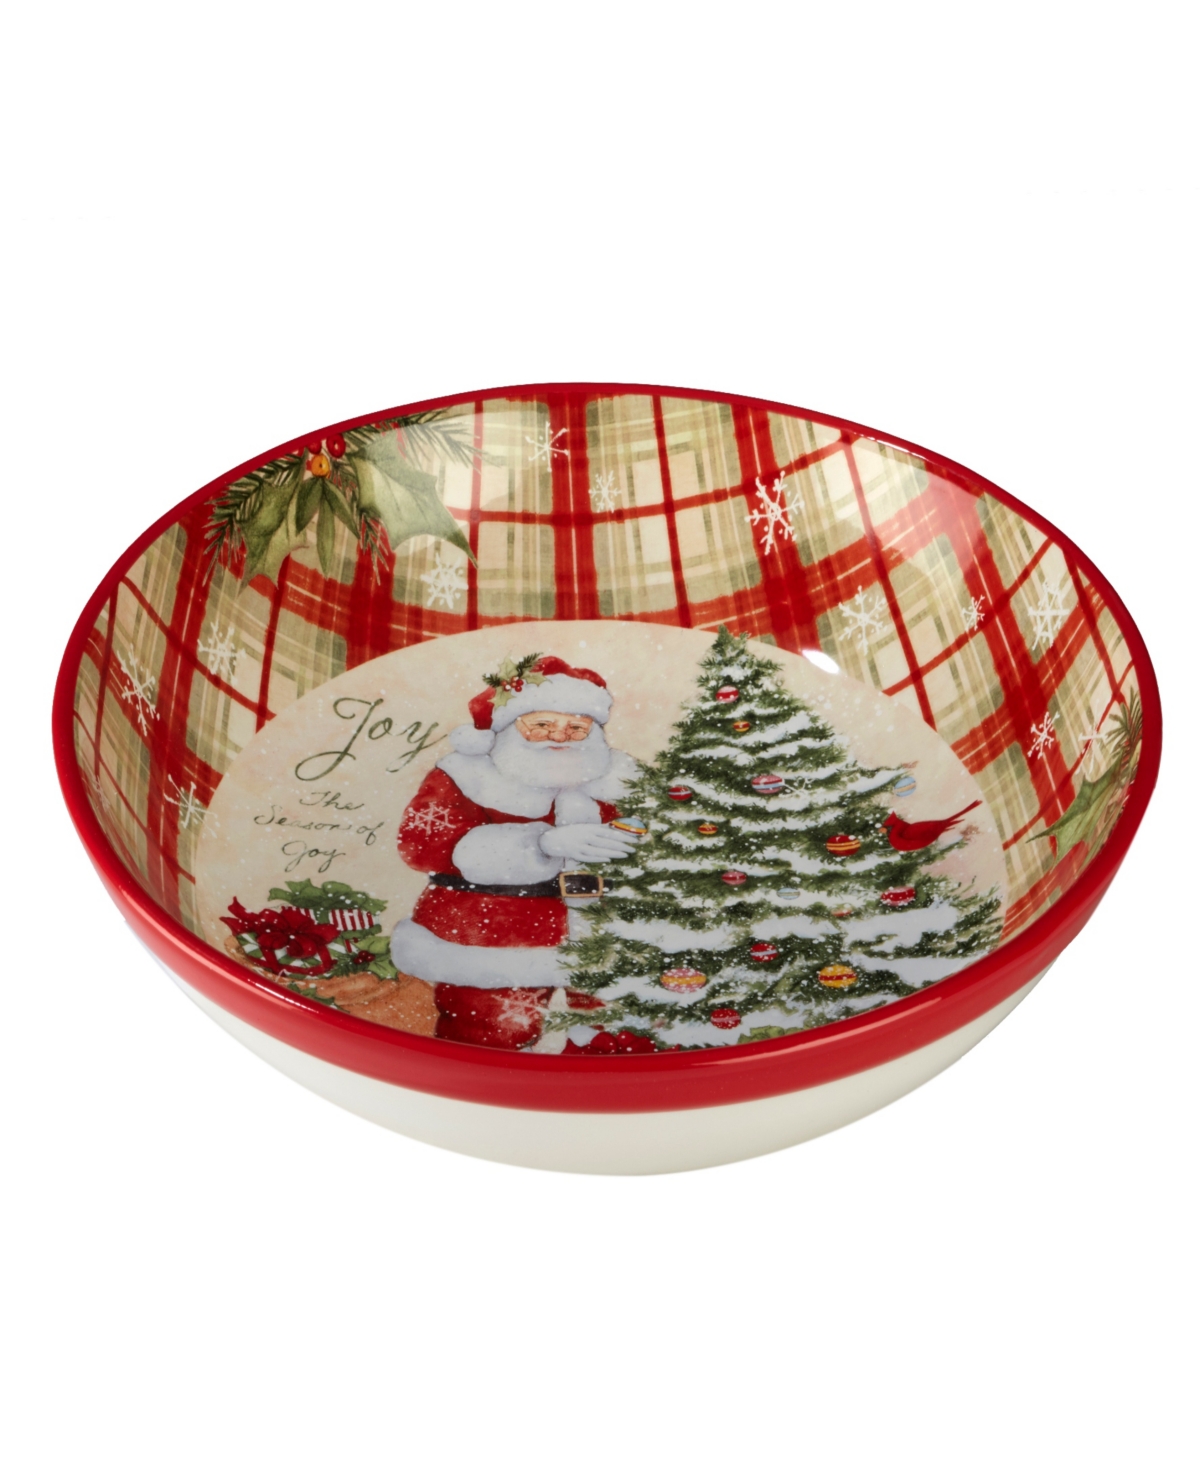 Holiday Wishes Serving/Pasta Bowl - Beige/red/green